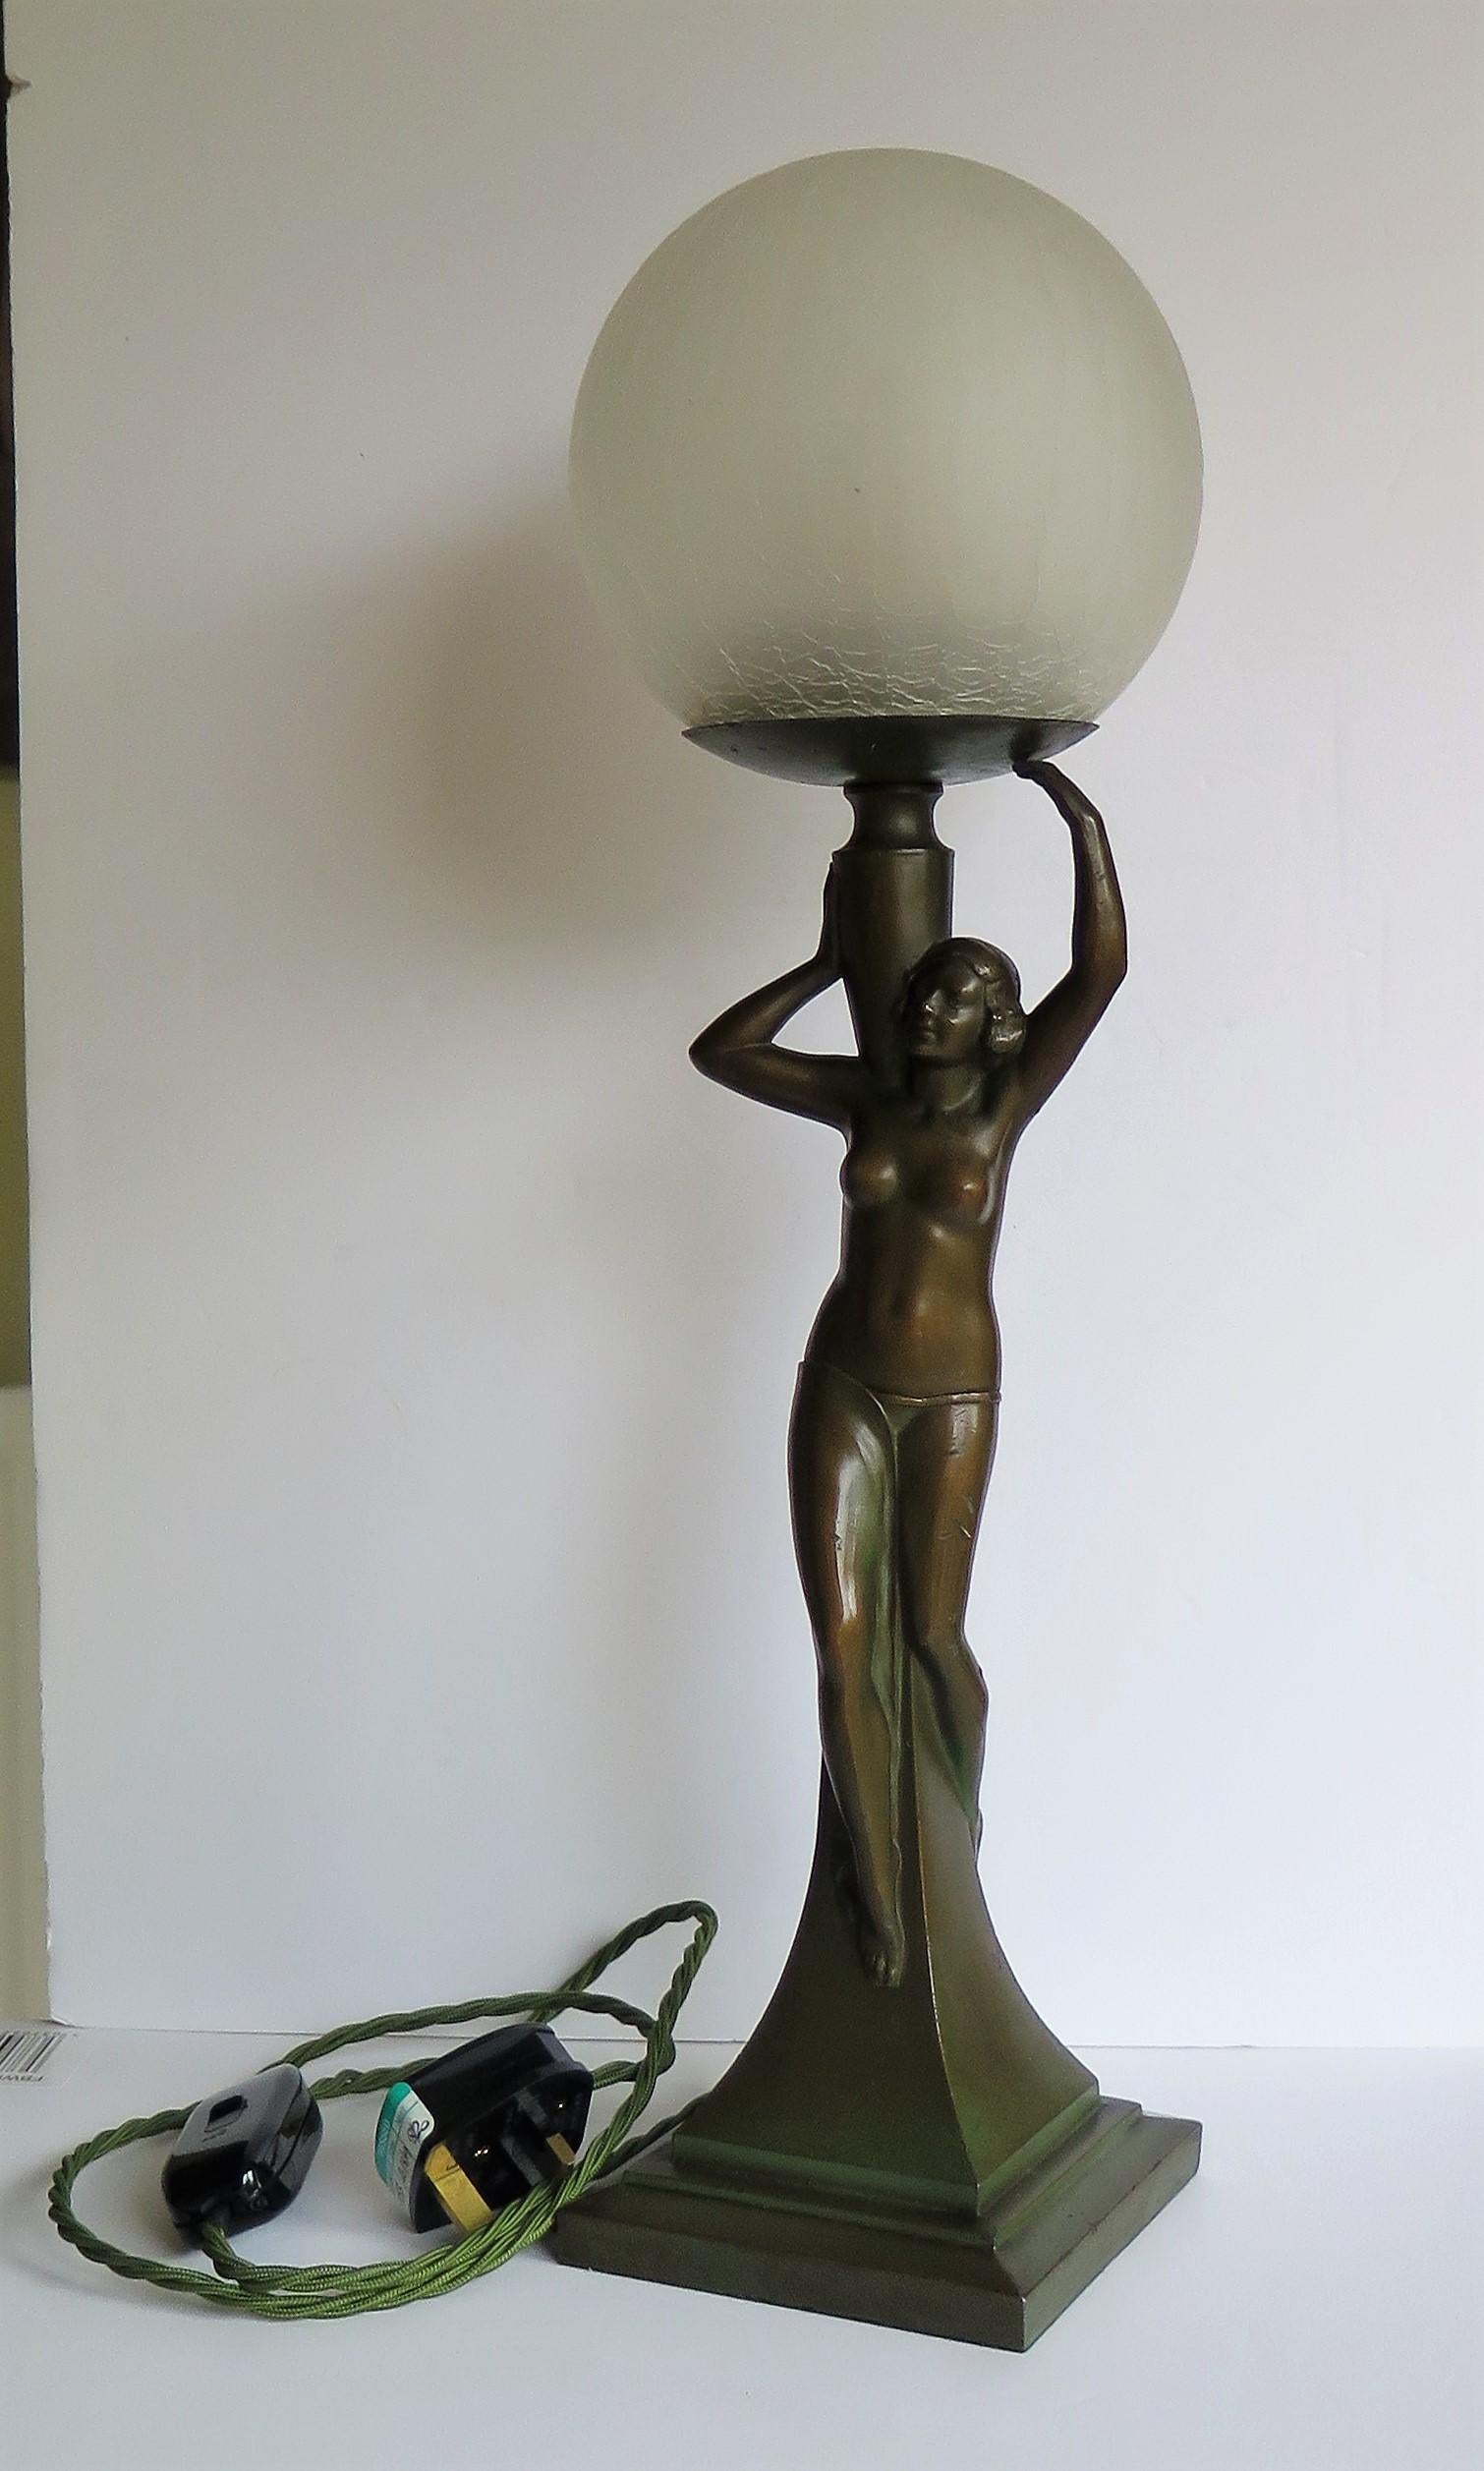 This is a stunning figurine table lamp of a water Carrier Lady Figurine sculpture made of Spelter in France, circa 1930.

The figurine is made of spelter with good detail. It has developed a lovely patinated bronze colour with a green